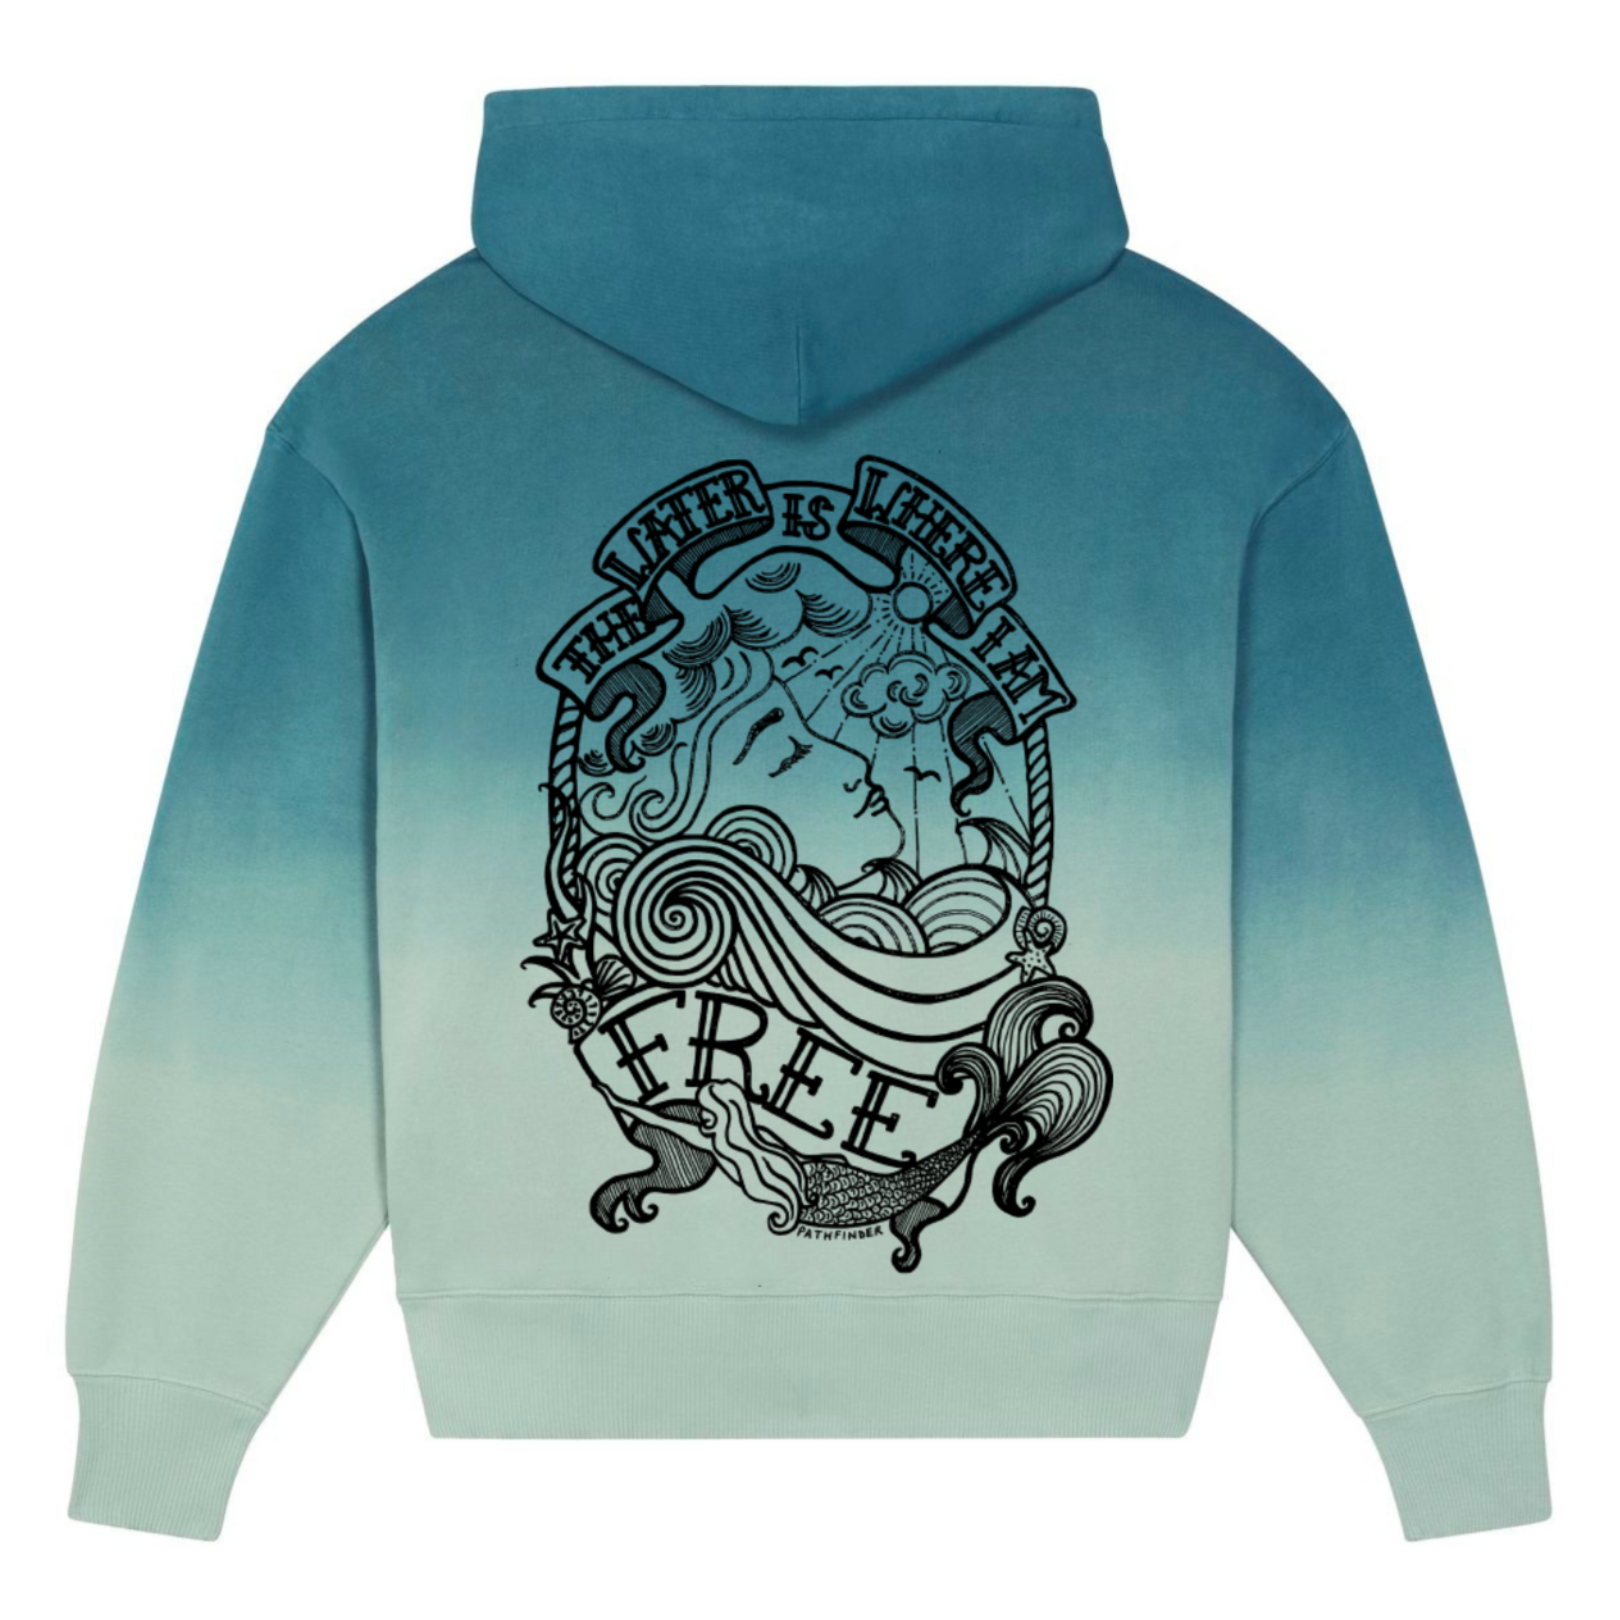 A hoodie in shades of blue, with a print of a woman's face, surrounded by the words 'The water is where I am free' and a mermaid.